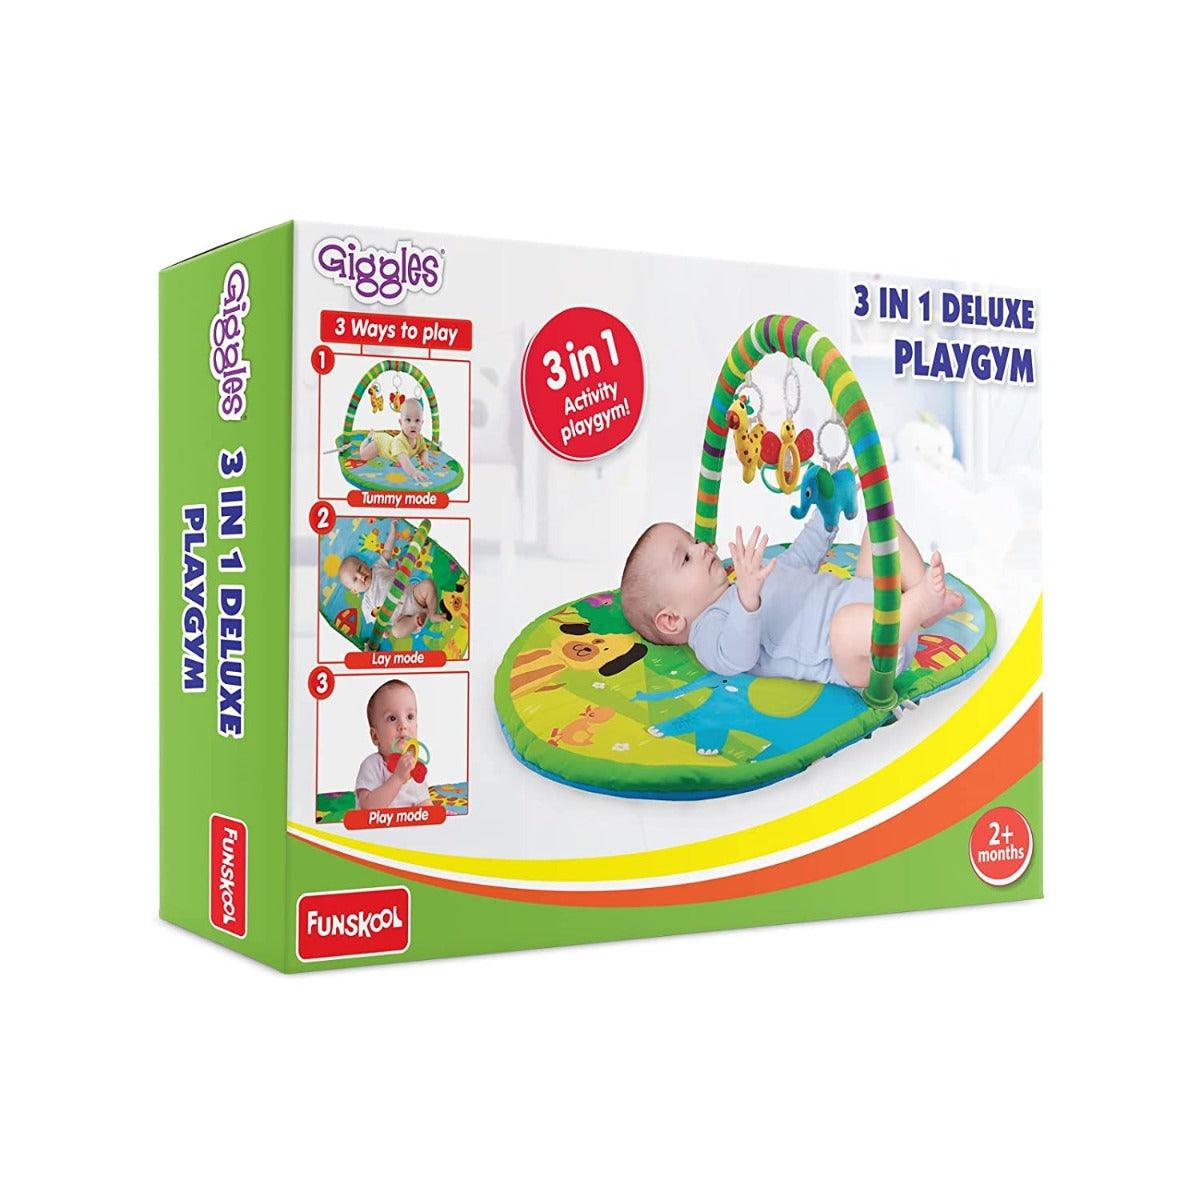 Funskool Giggles 3 In 1 Deluxe Playgym for Ages 0-3 Years